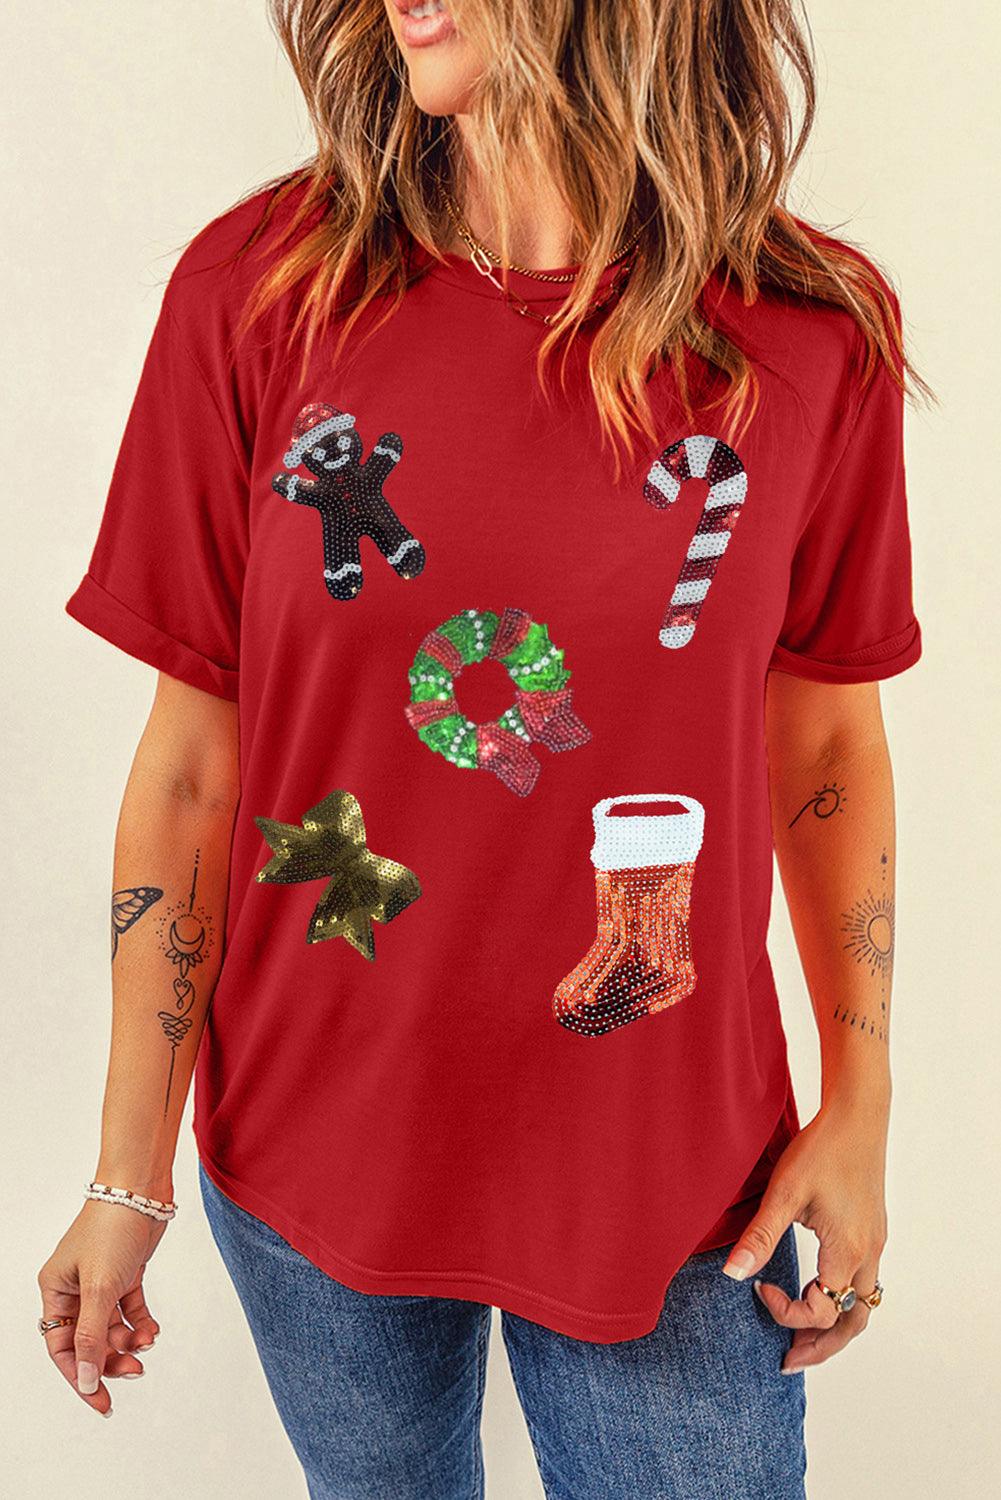 Red Christmas Sequin Pattern Crew Neck Graphic Tee - L & M Kee, LLC